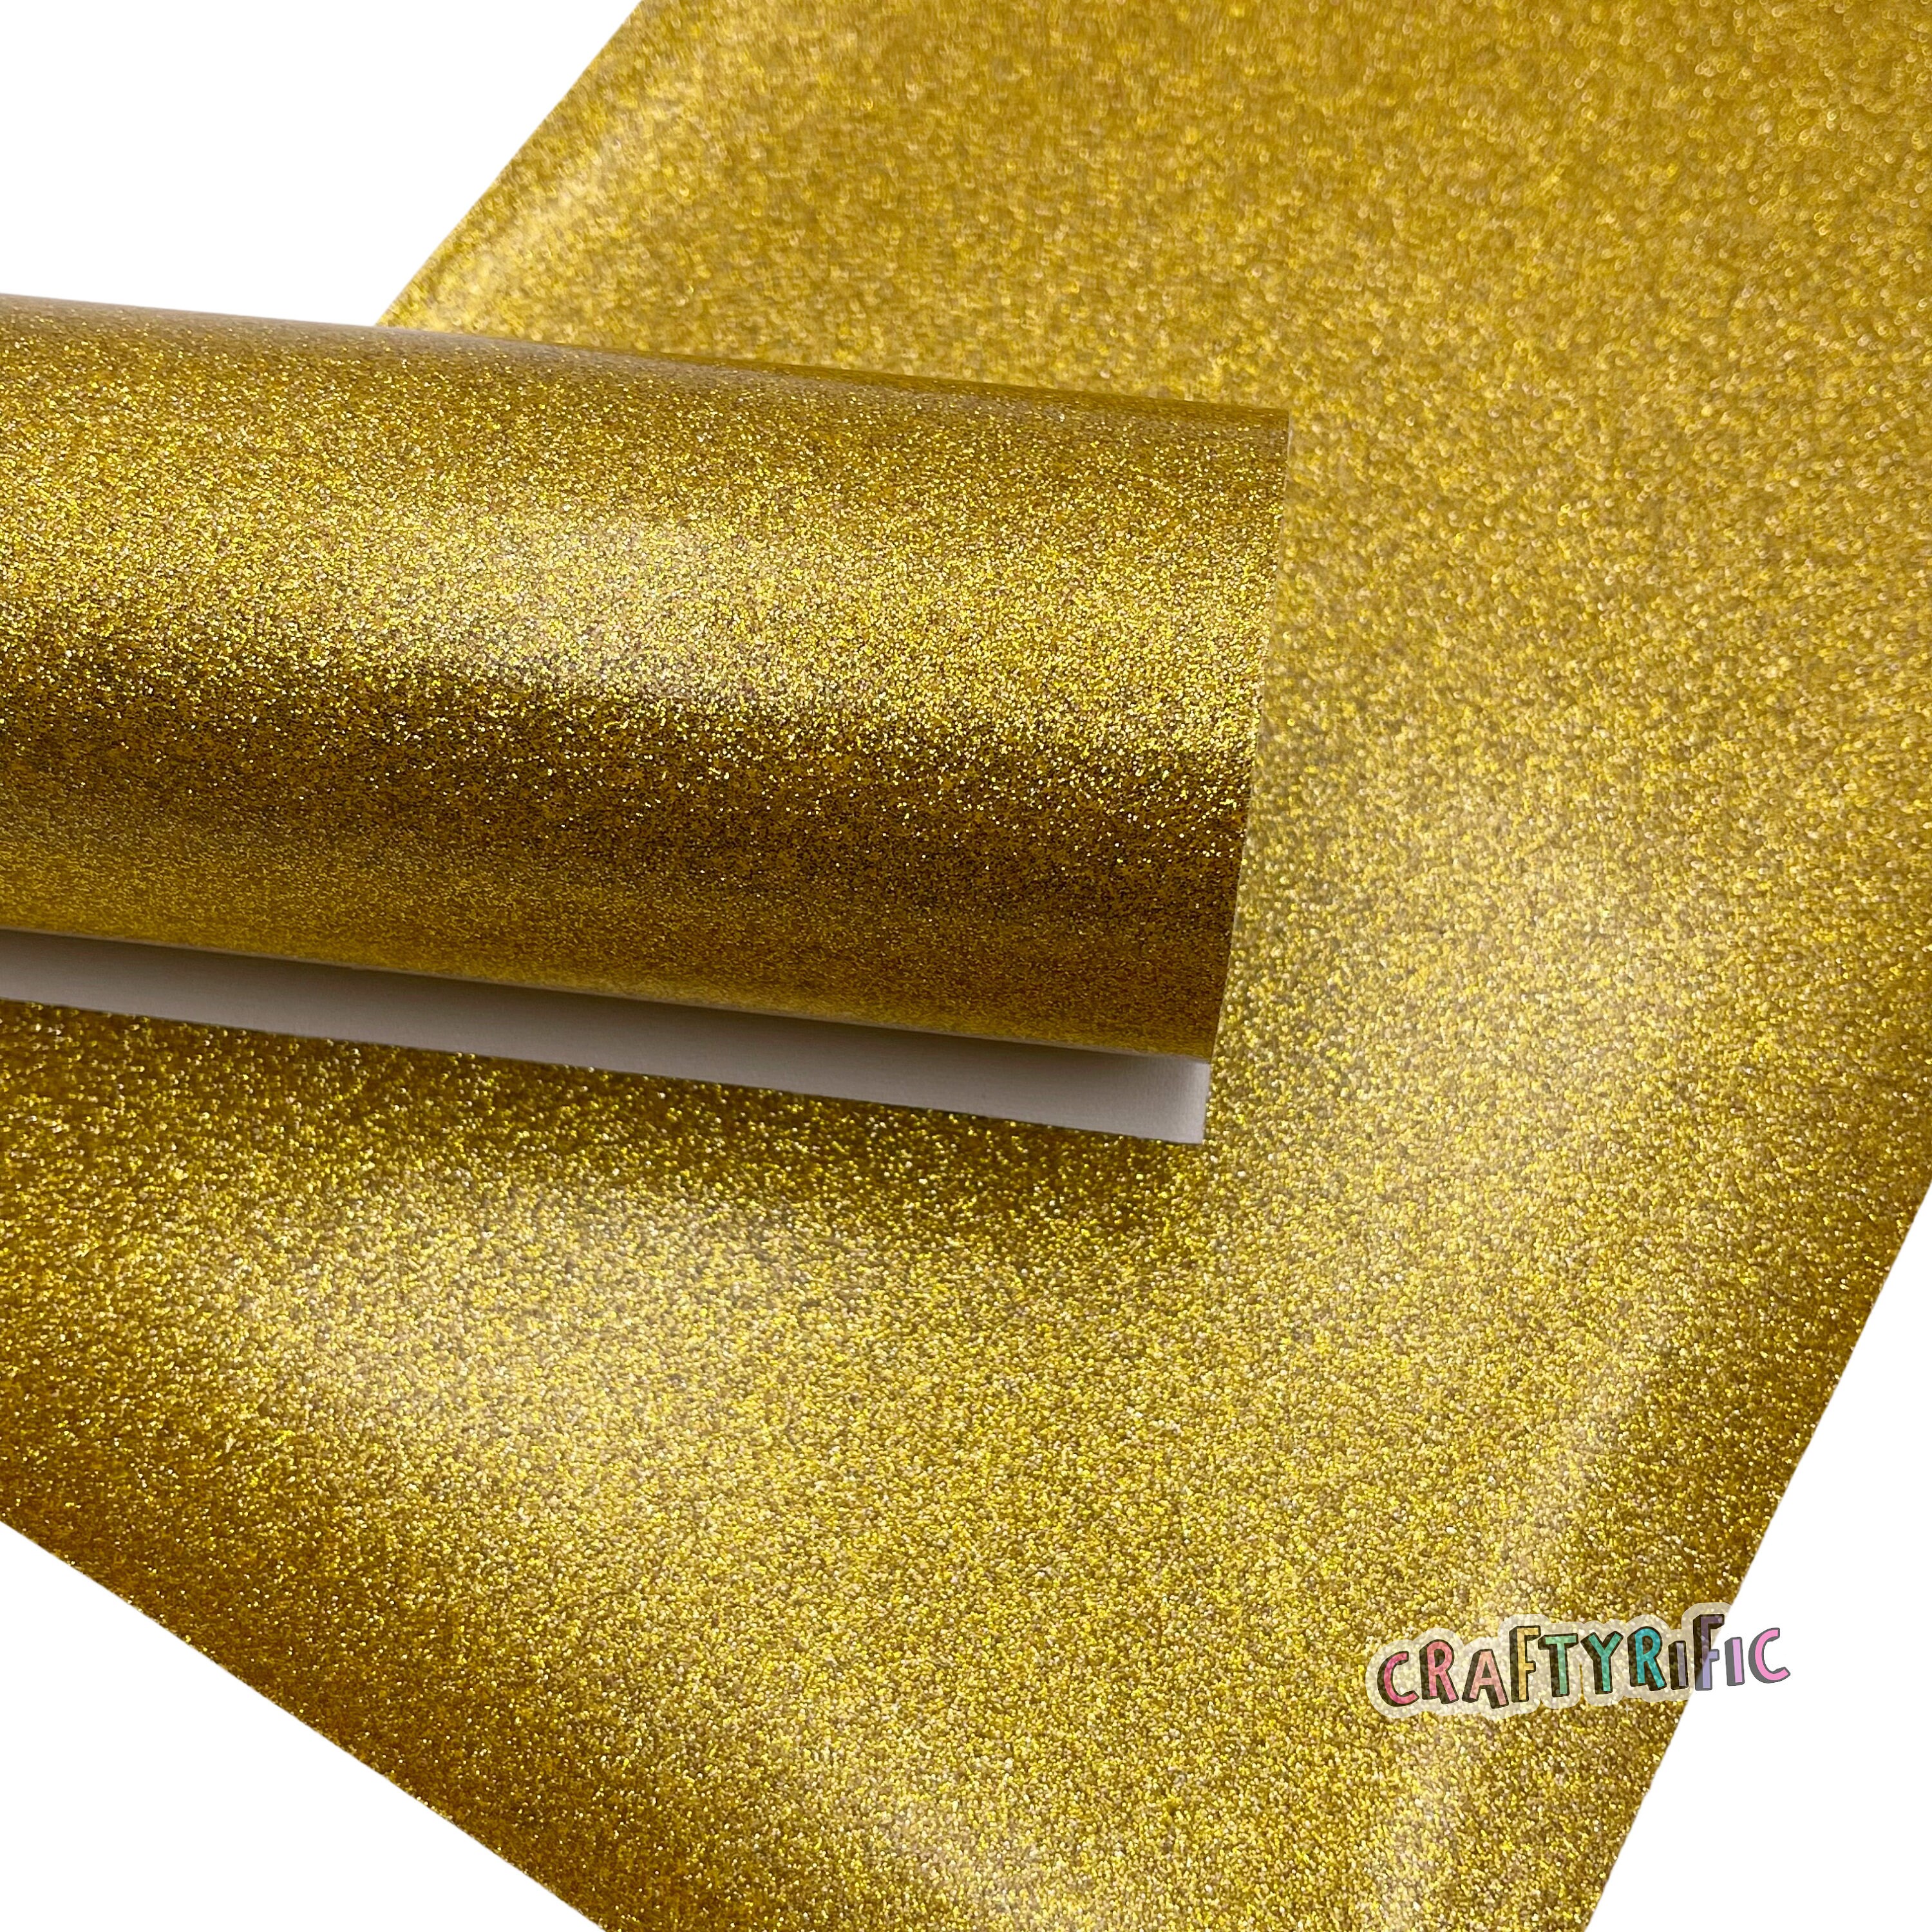 Yellow Glitter Vinyl With Canvas Back For Embroidery, Glitter Sheets,  Embroidery Glitter, Hair Bow Material